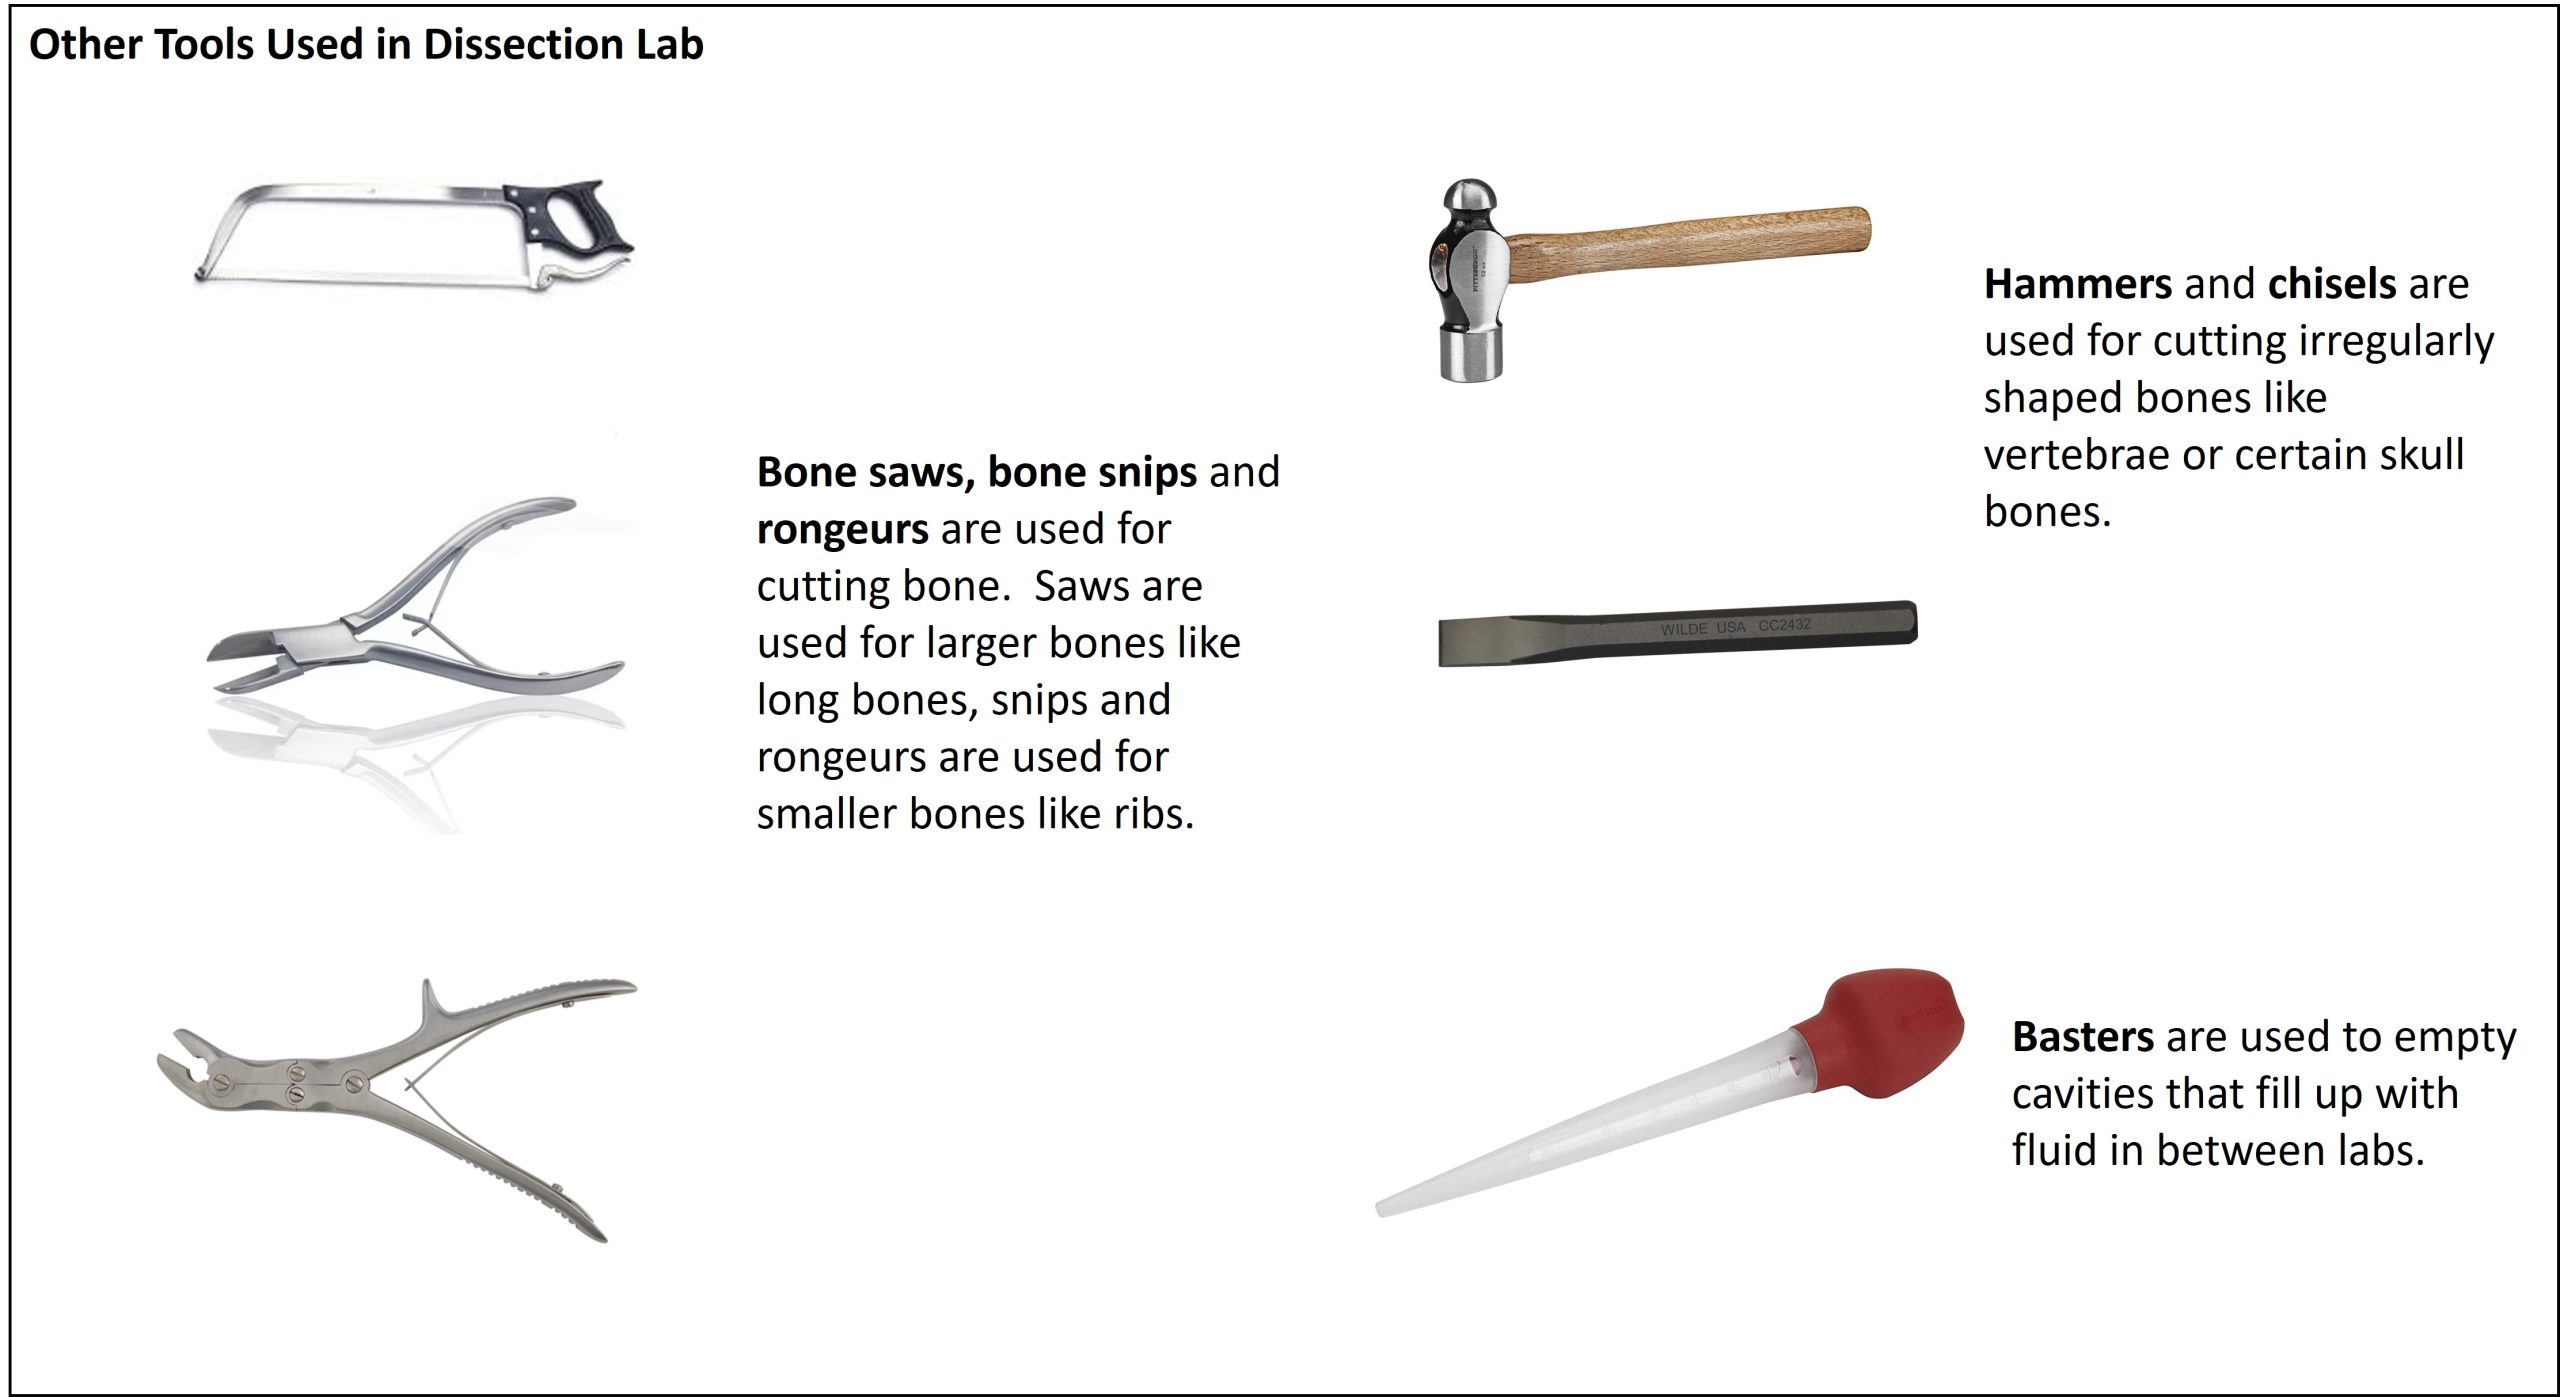 Other Tools Used in the Dissection Lab